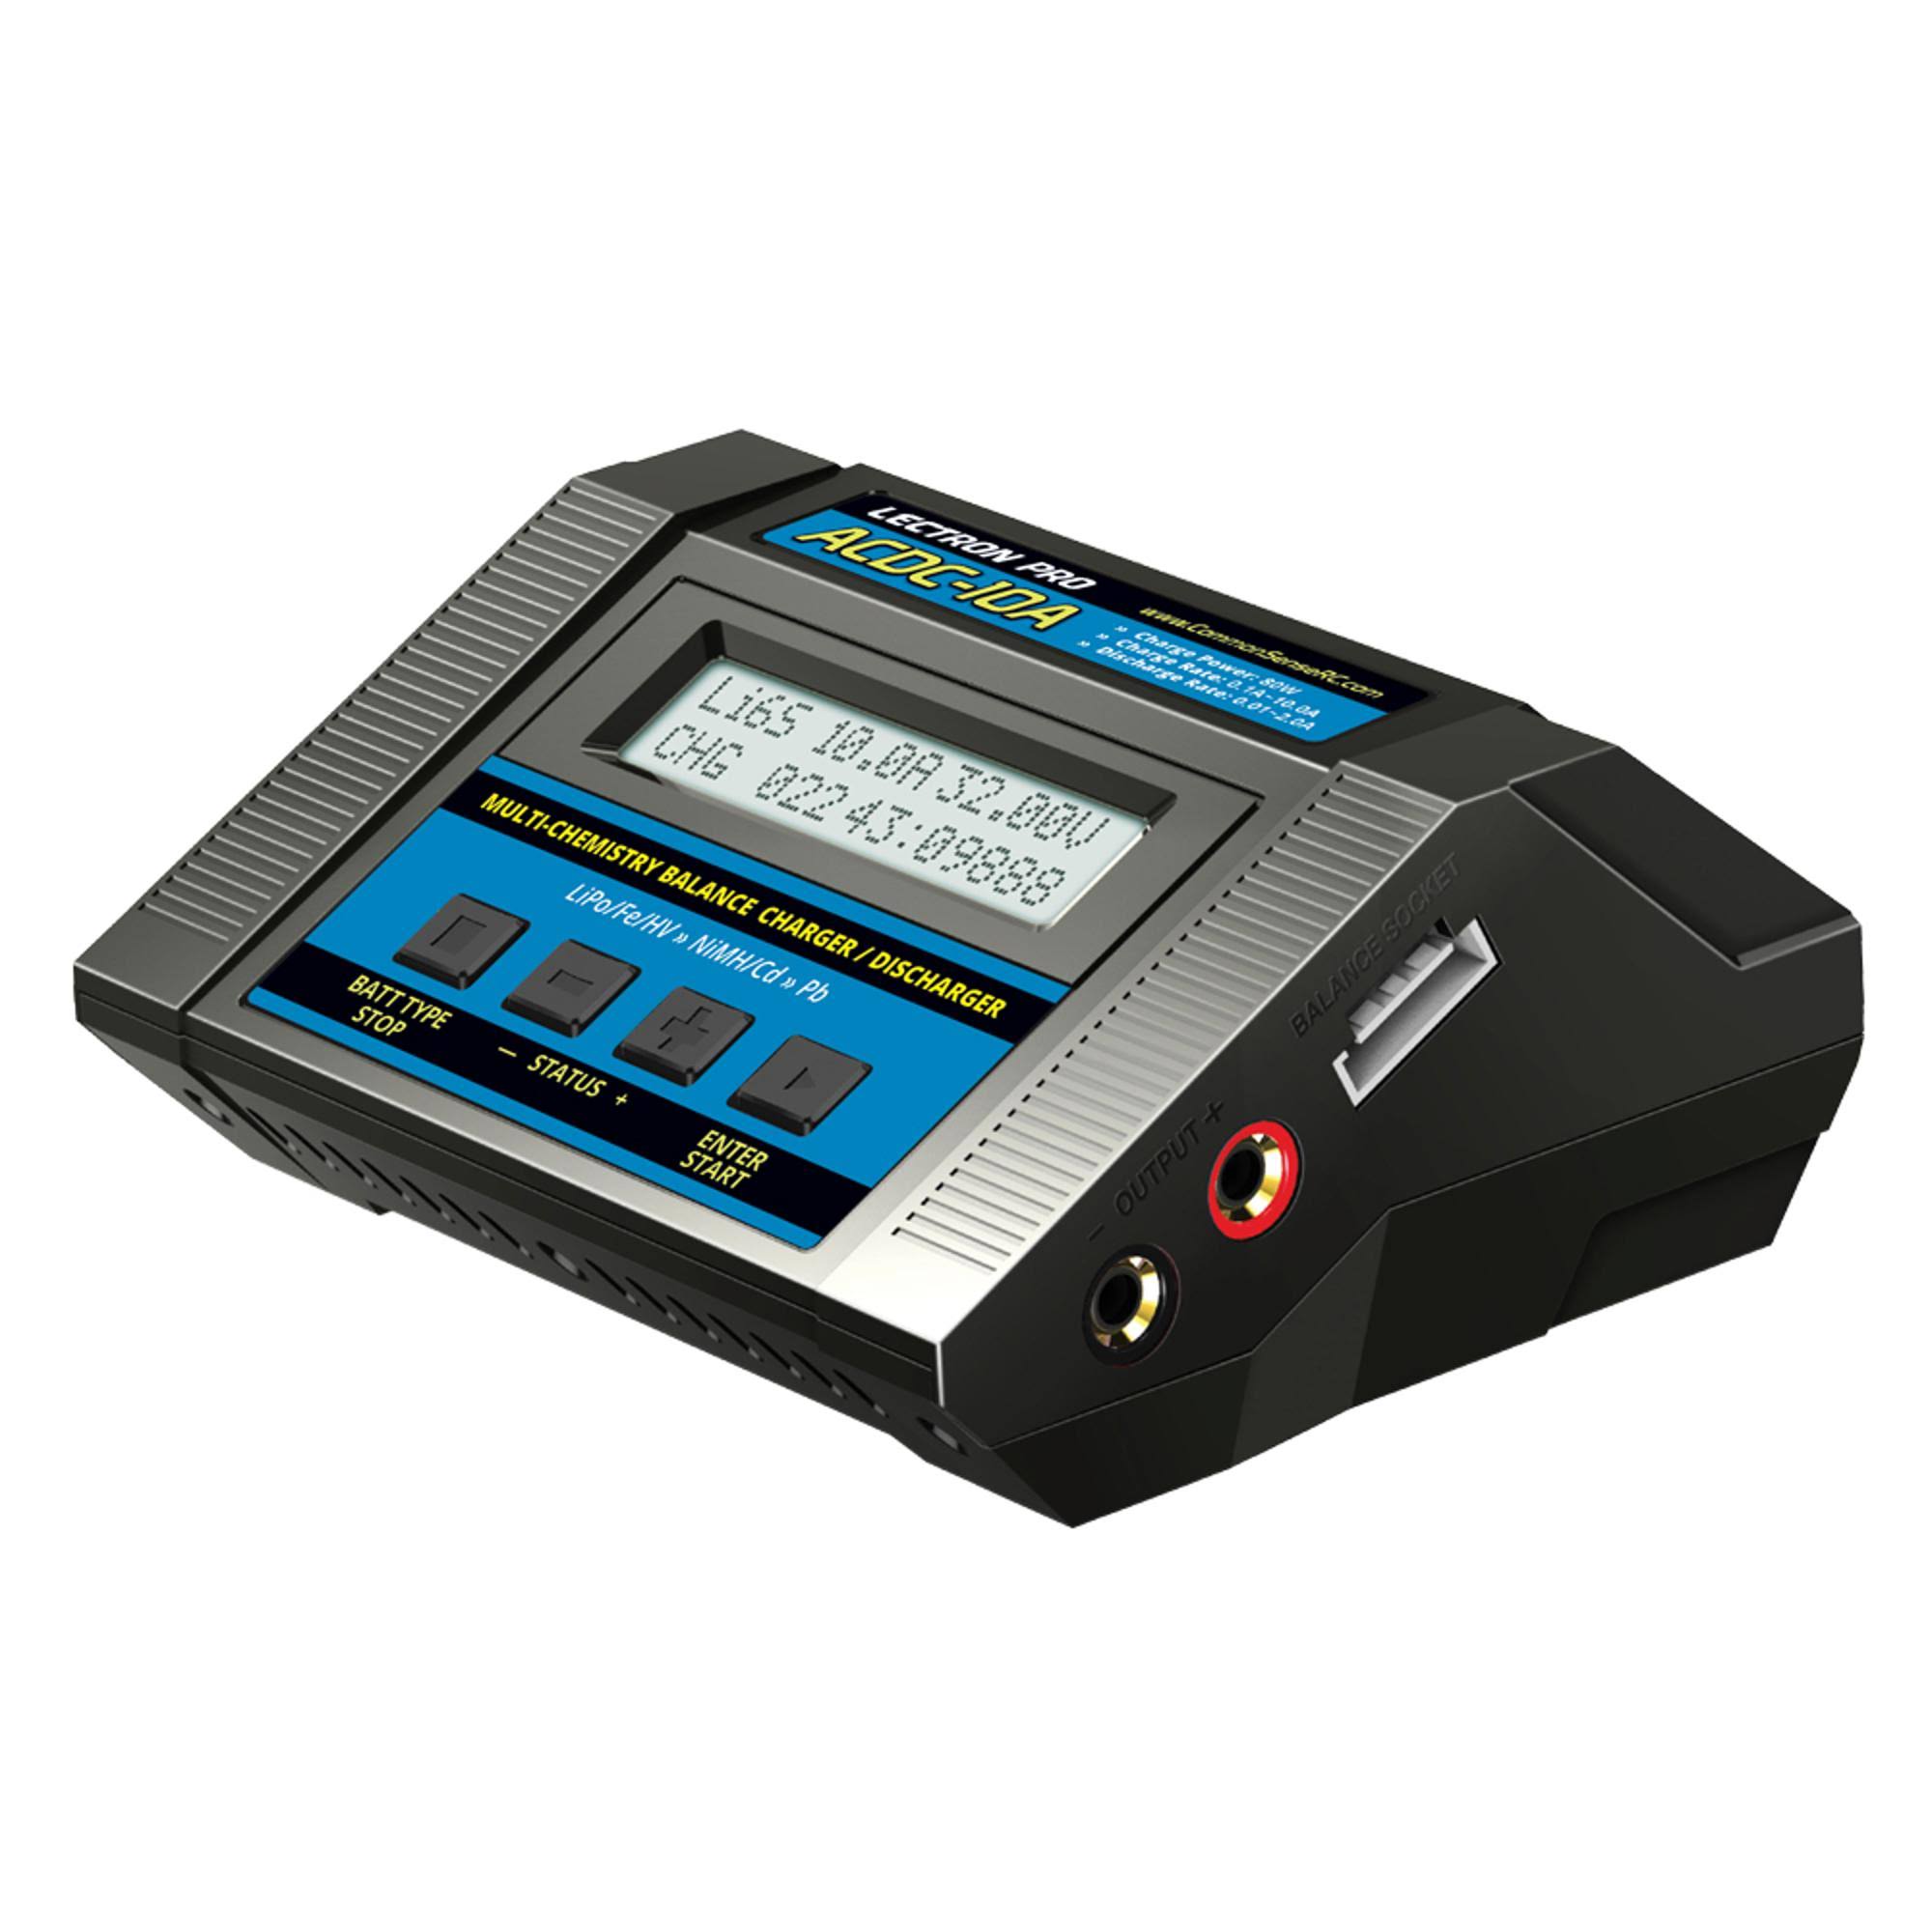 Acdc-10a 1S-6S 80W 10A Multi-Chemistry Balancing Charger